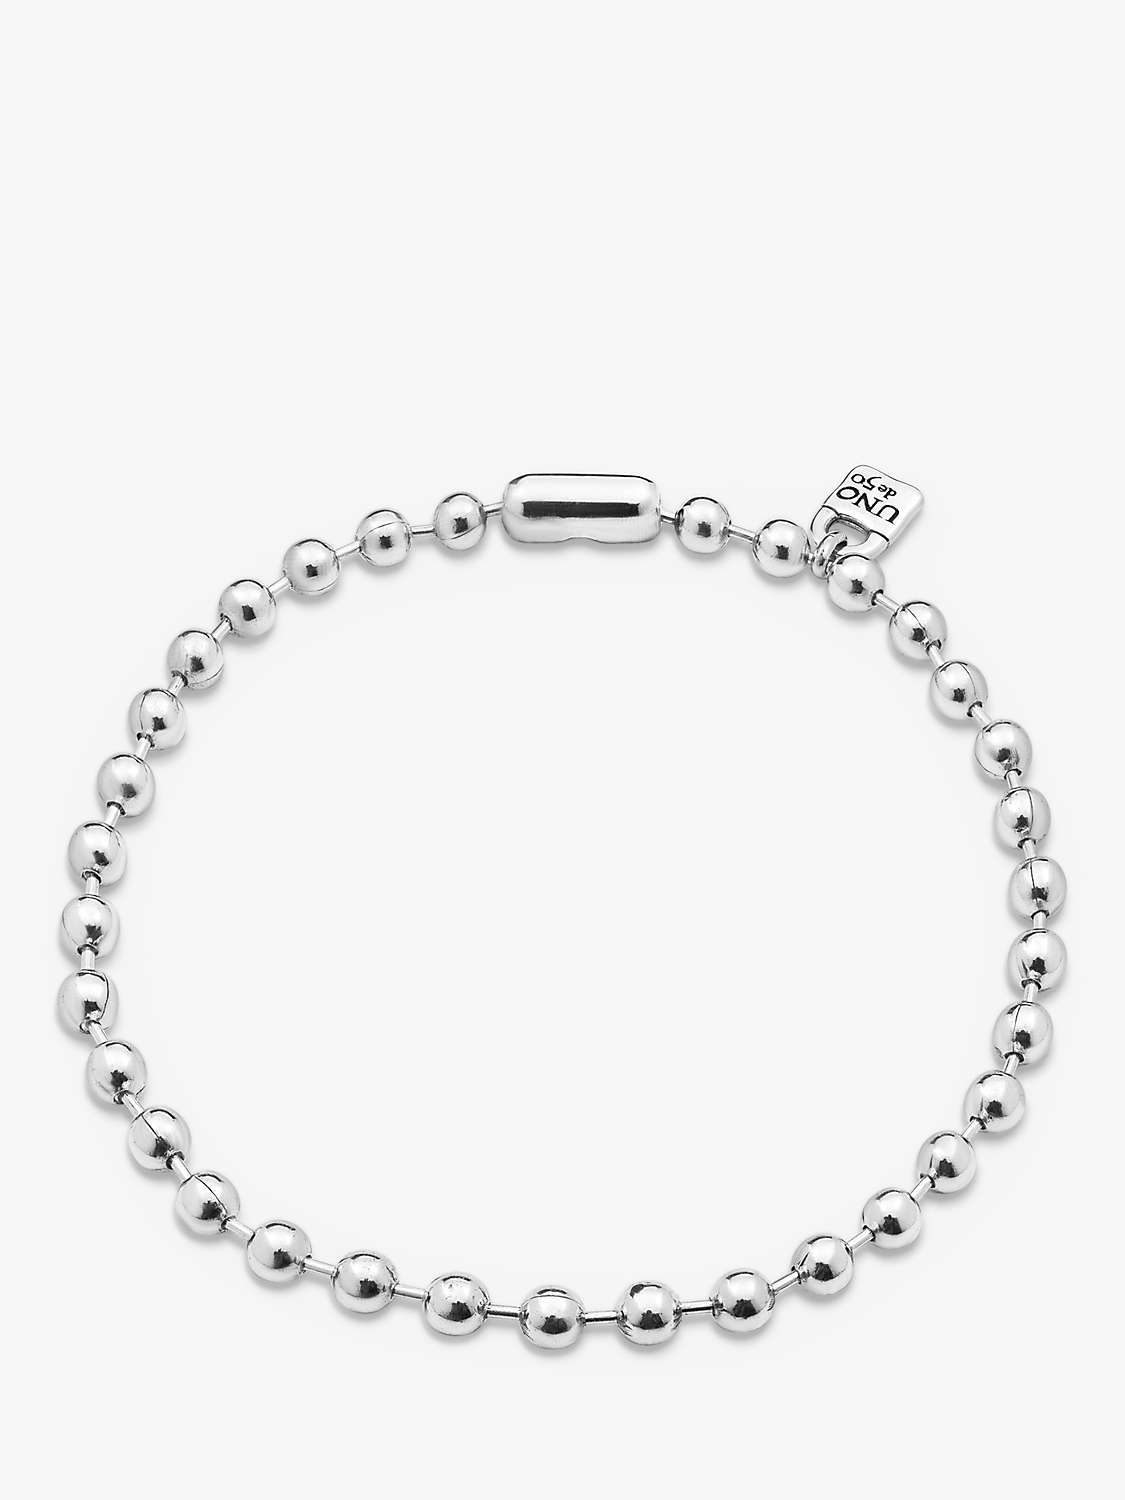 Buy UNOde50 Copito De Nieve Large Bead Chain Necklace, Silver Online at johnlewis.com